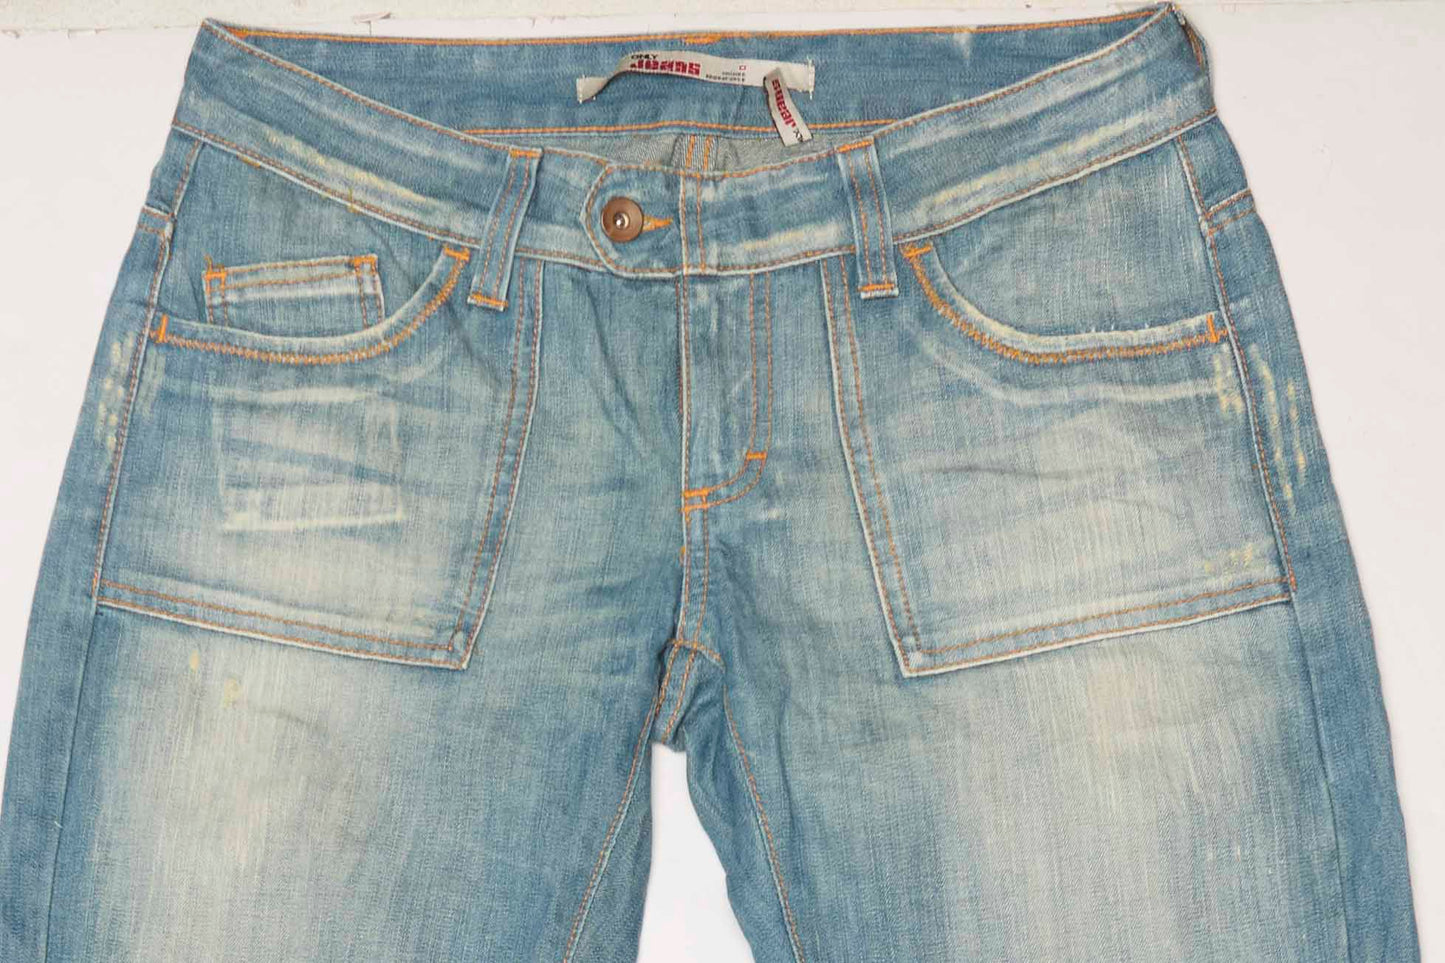 Straight Leg Only Jeans - W30" L34"